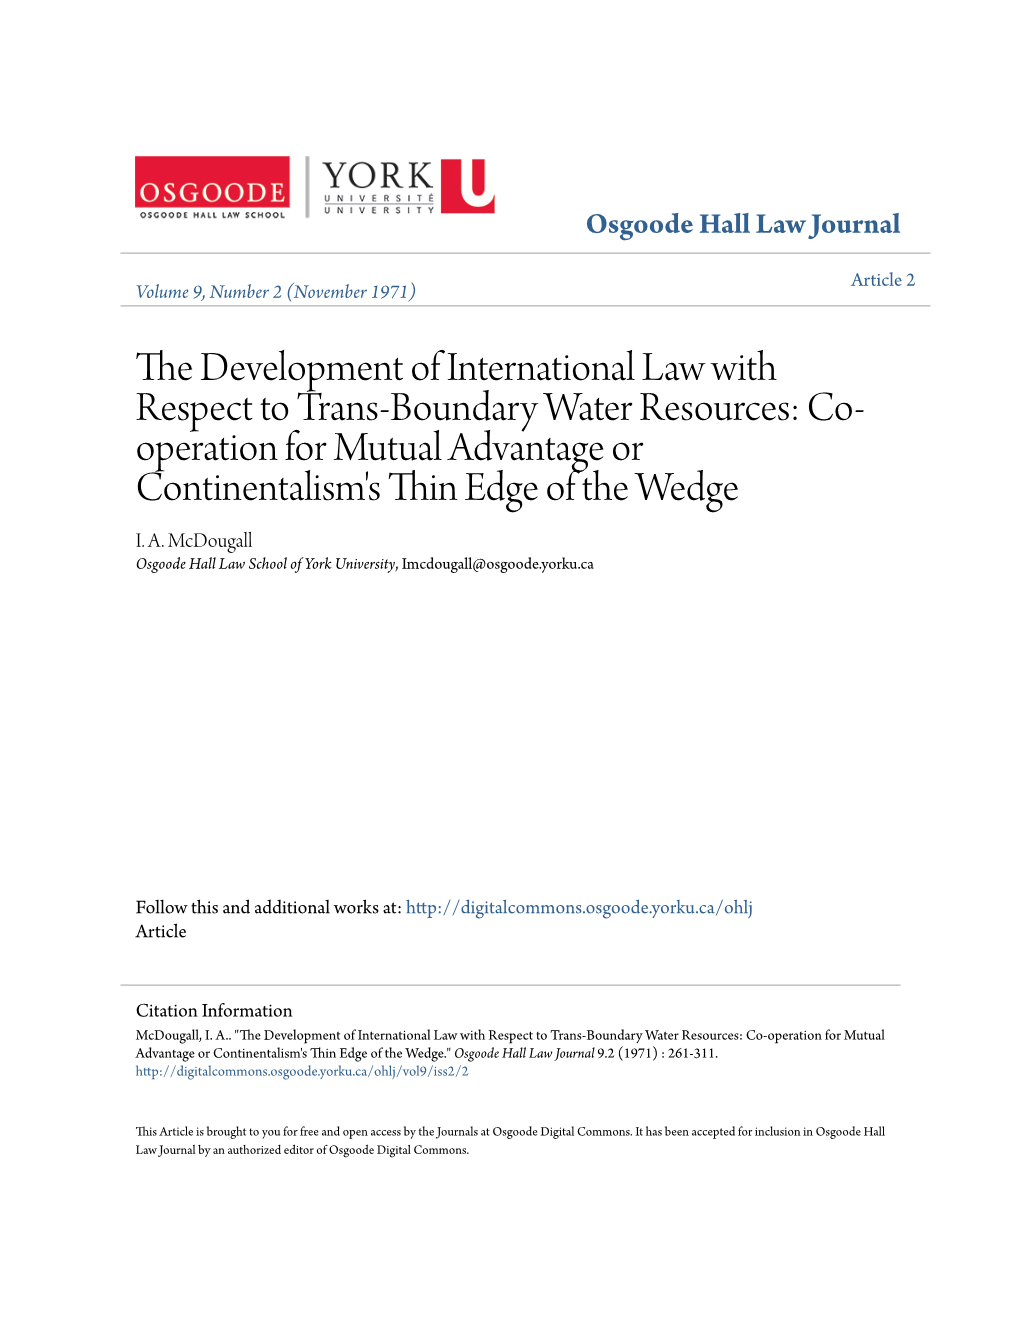 The Development of International Law with Respect to Trans-Boundary Water Resouces: Co-Operation for Mutual Advantage Or Continentalism's Thin Edge of the Wedge? I